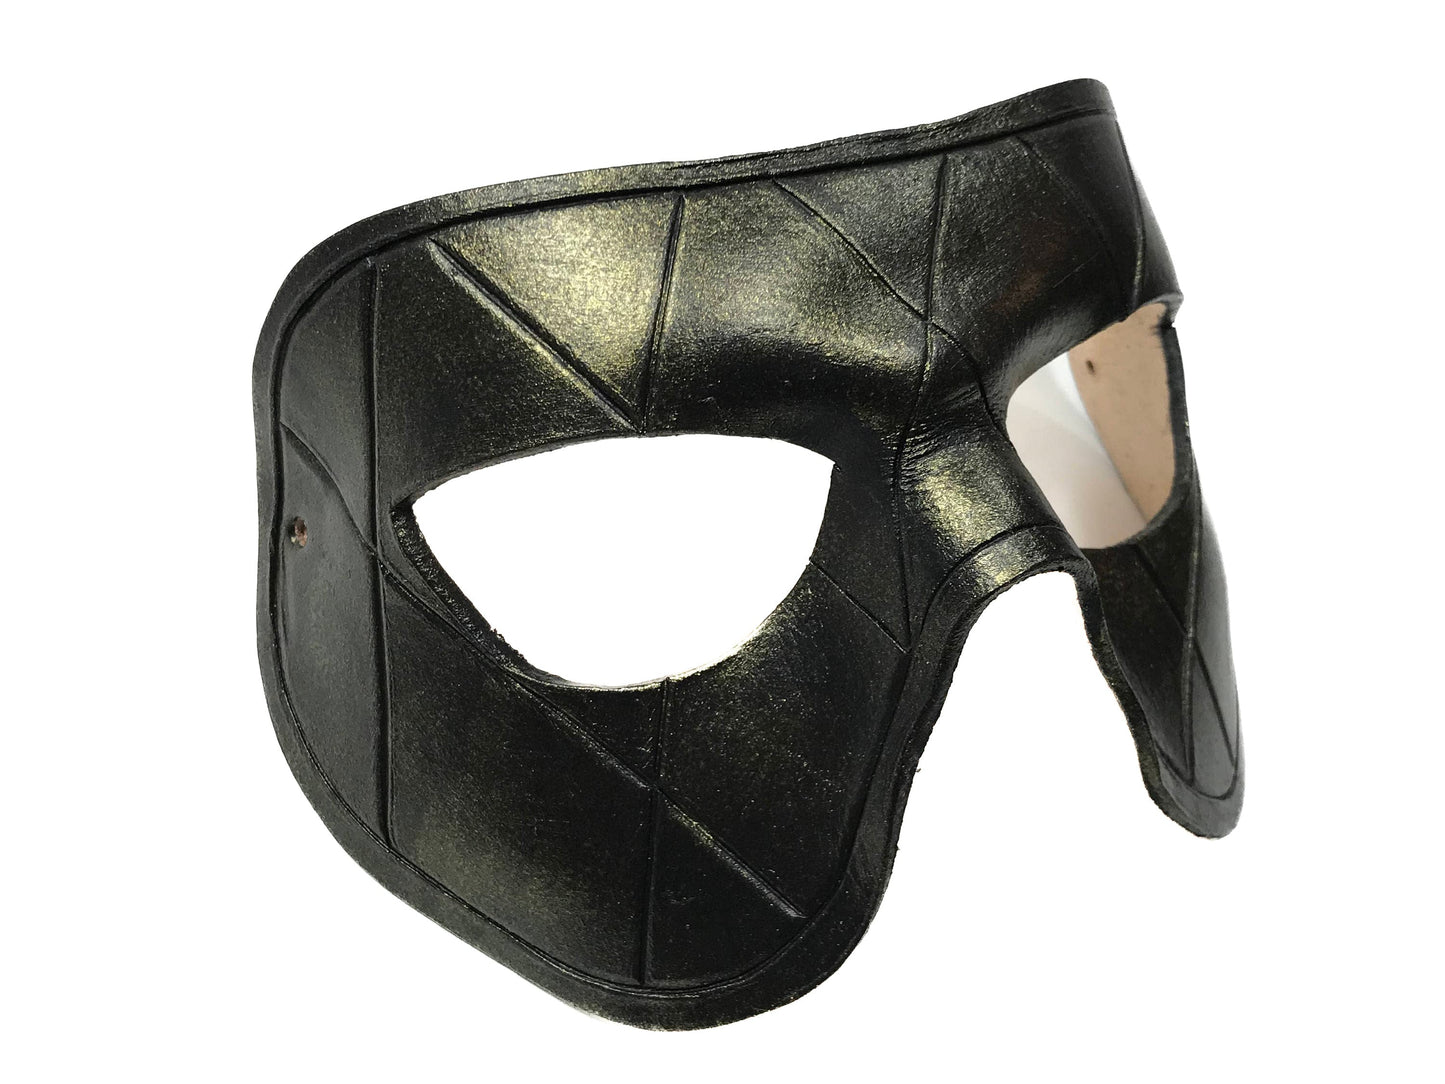 Harlequin Handmade Genuine Leather Mask in Black with Gold Hues